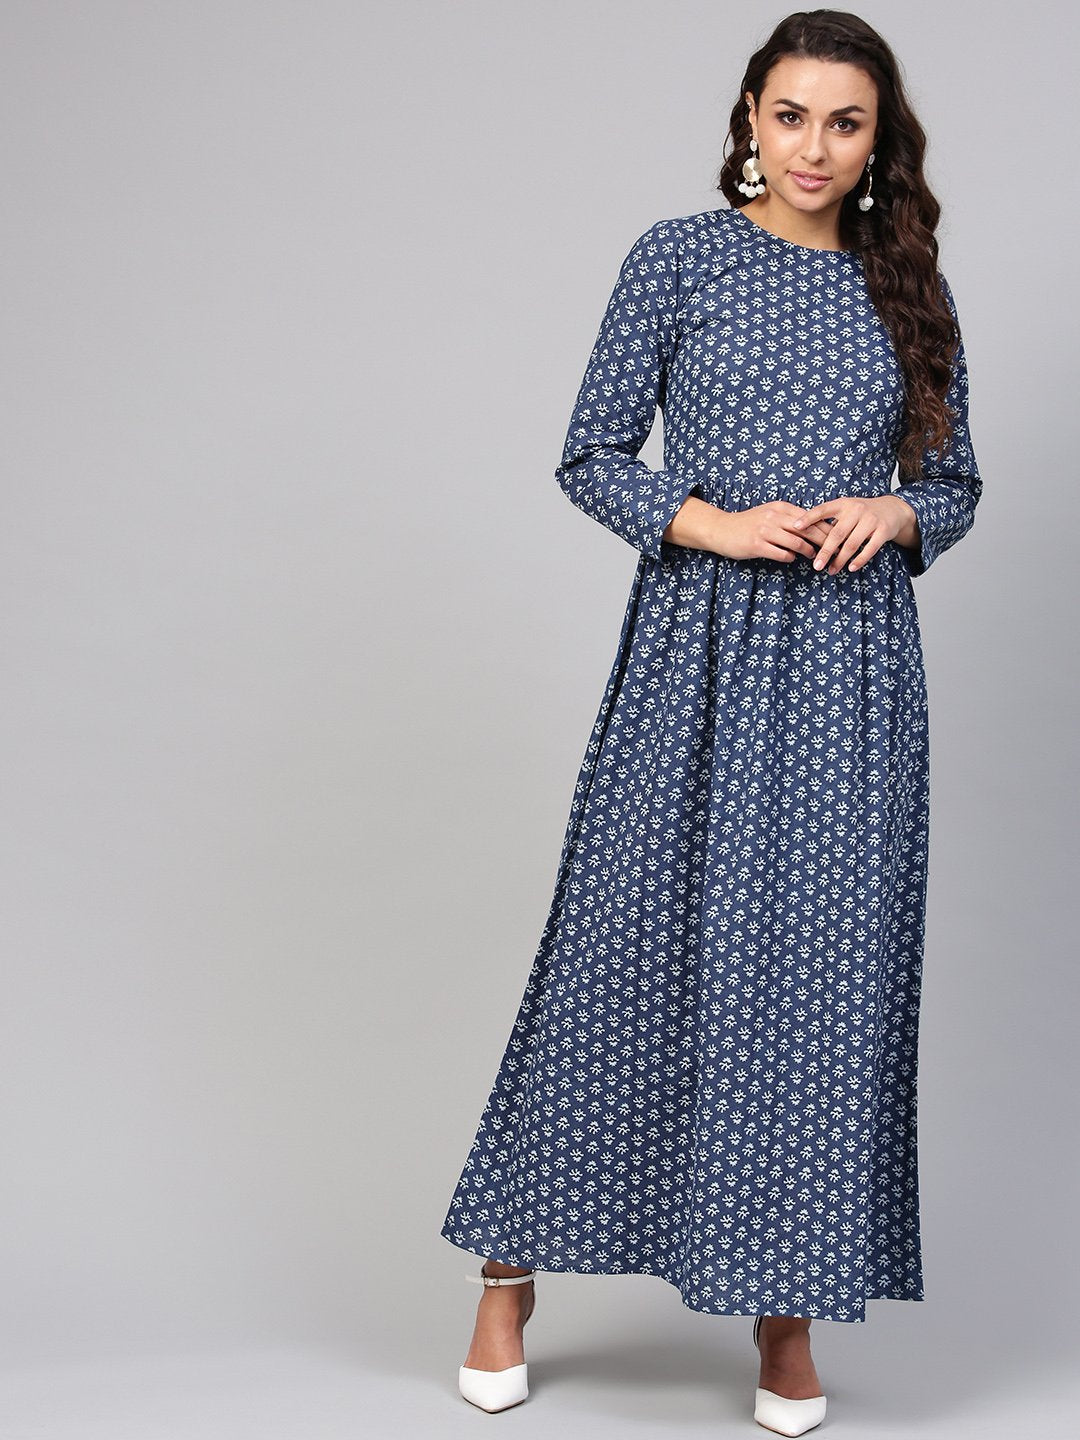 Women's Navy Blue Printed Maxi Dress With Round Neck & Full Sleeves - Nayo Clothing